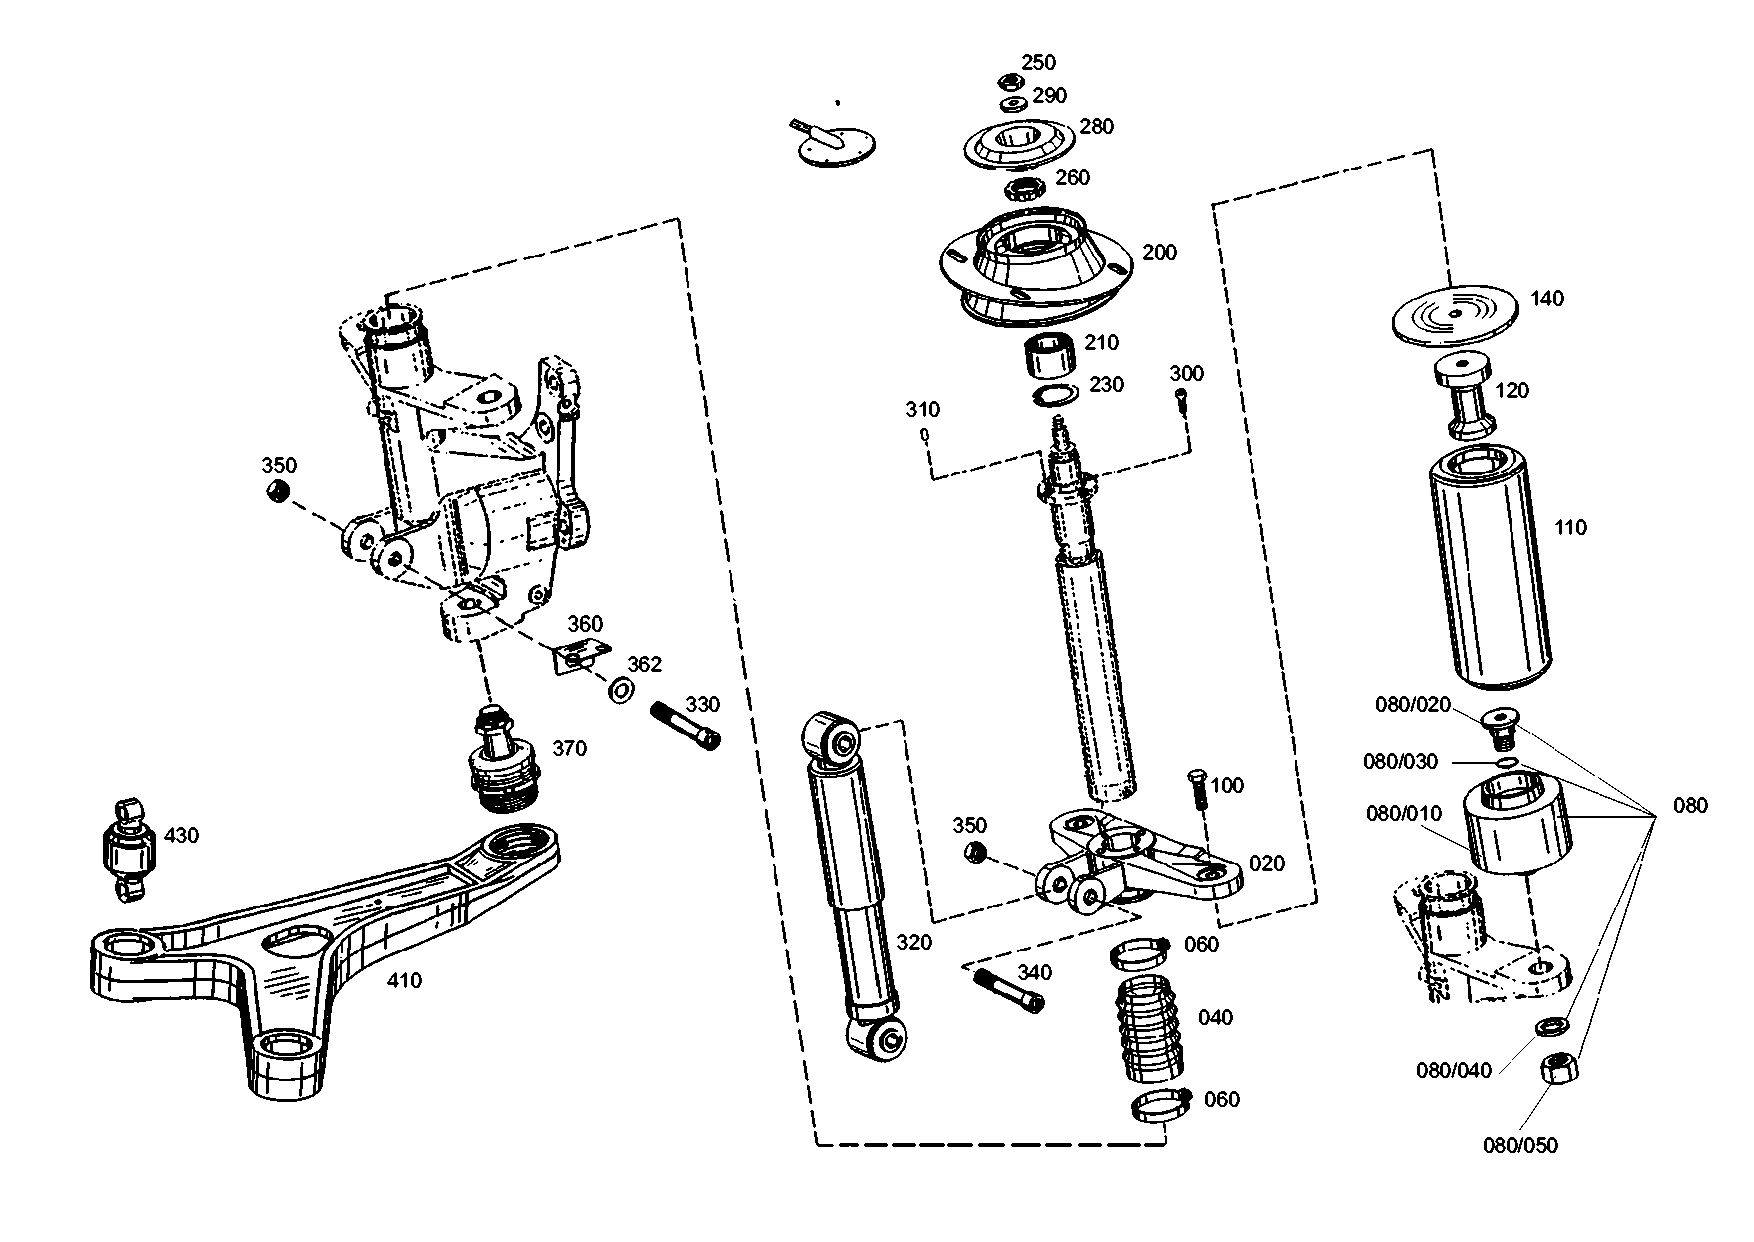 drawing for AGCO 020603R1 - HEXAGON SCREW (figure 5)